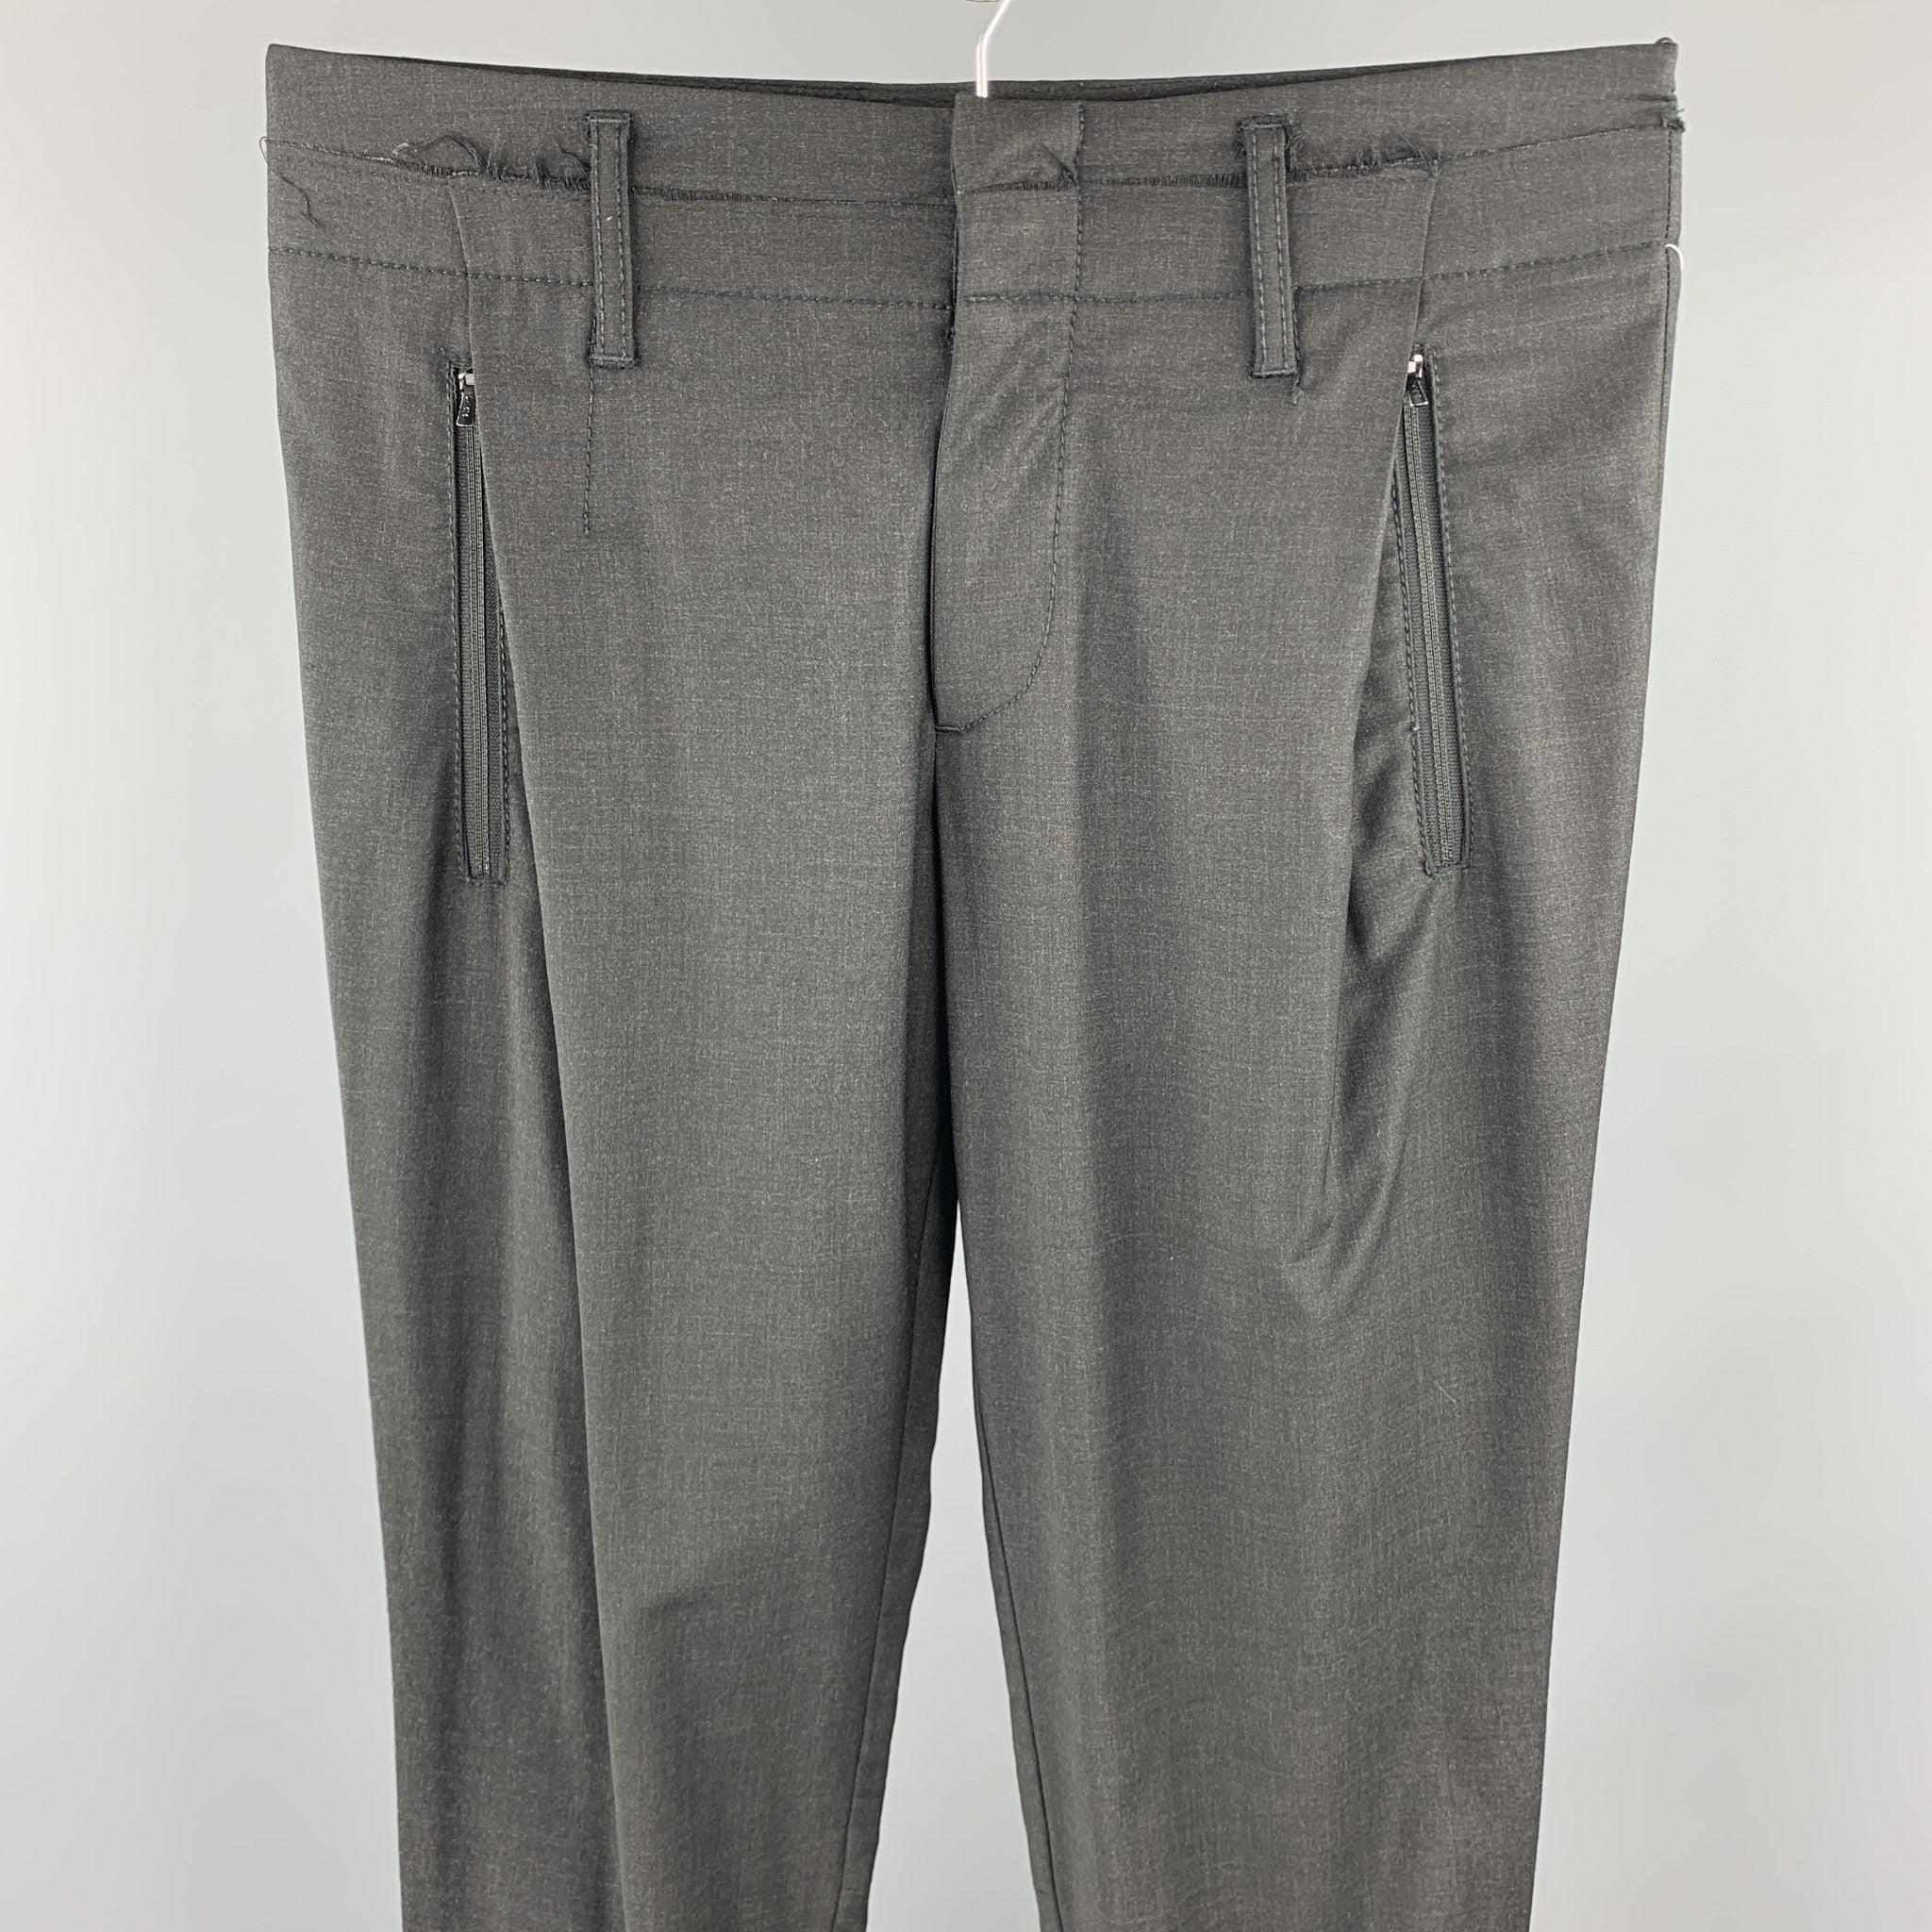 EMPORIO ARMANI Casual Pants comes in a black wool blend featuring a flat front style, distressed details, contrast stitching, zipper pockets, and a zip fly closure. Made in Italy.
Excellent
Pre-Owned Condition. 

Marked:   30 

Measurements: 
 